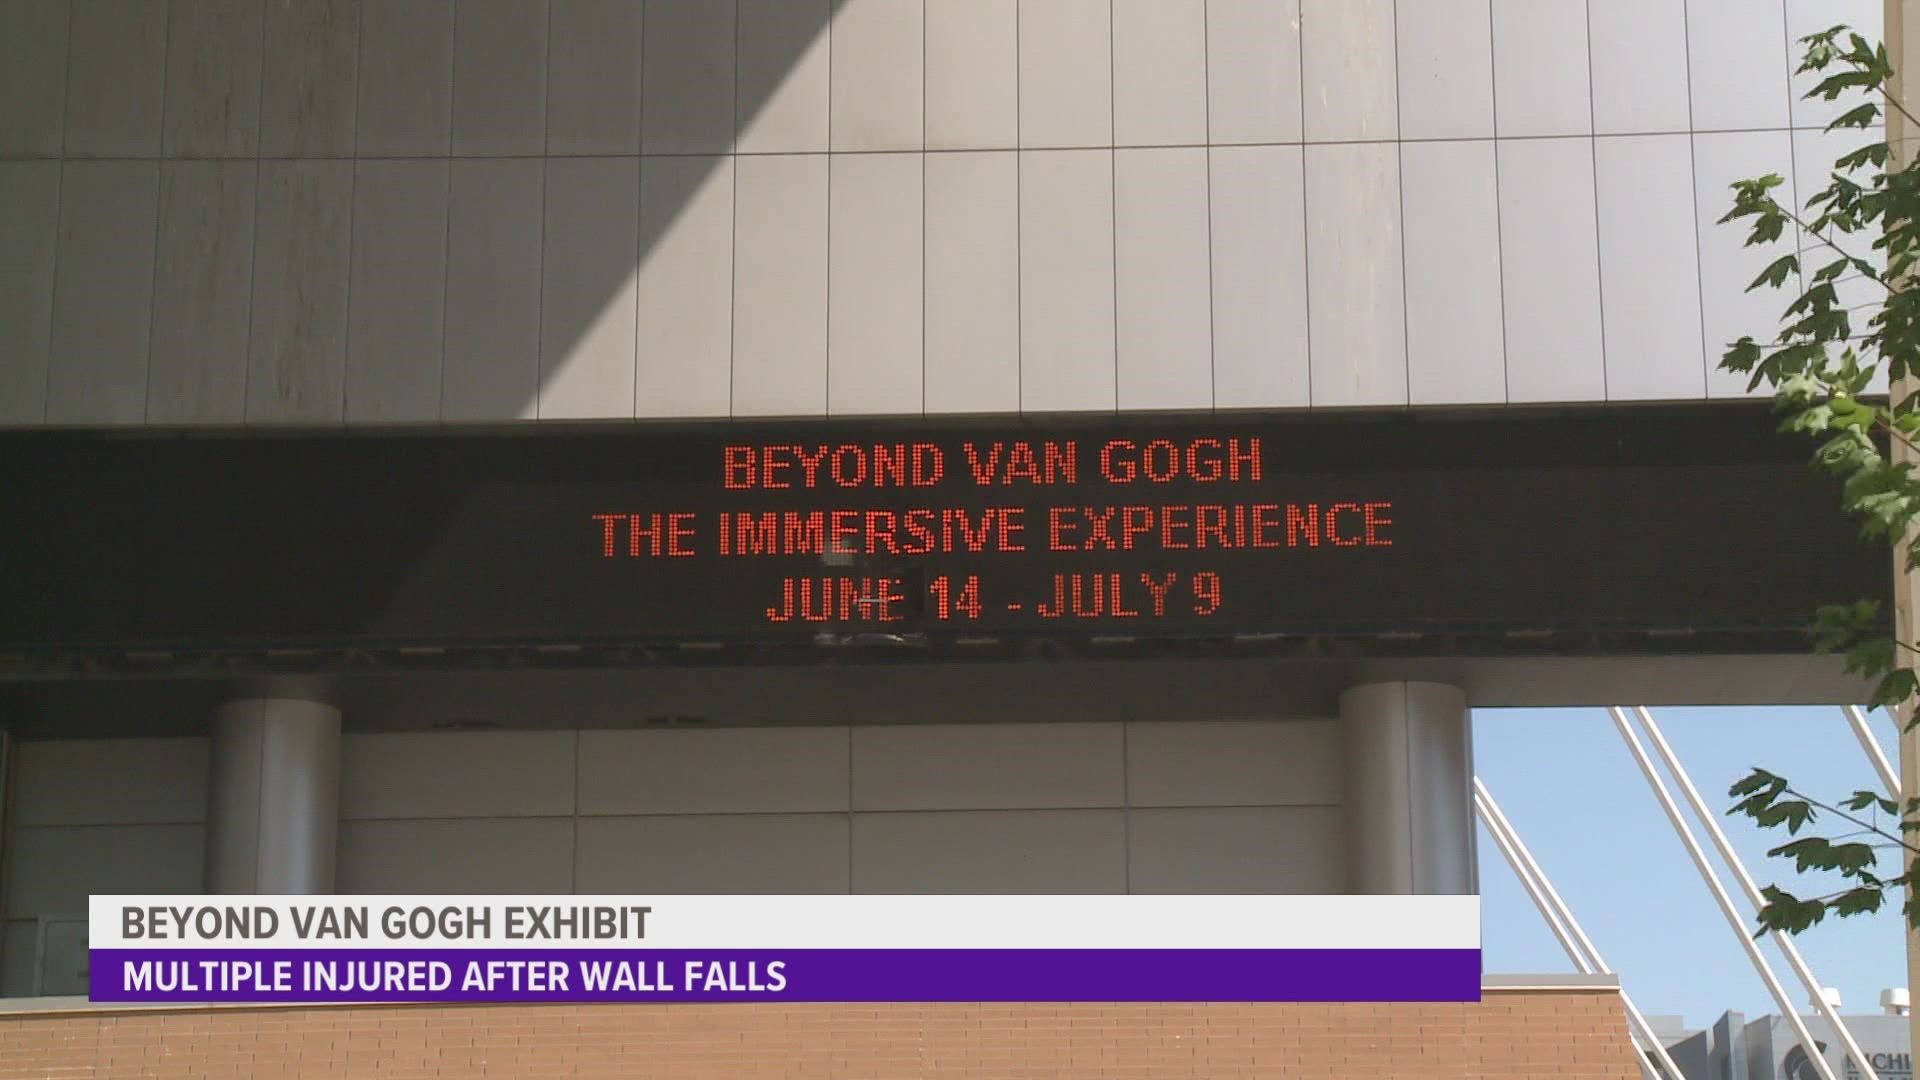 The Grand Rapids Fire Department says it happened in the Beyond Van Gogh exhibit at DeVos Place Wednesday afternoon.